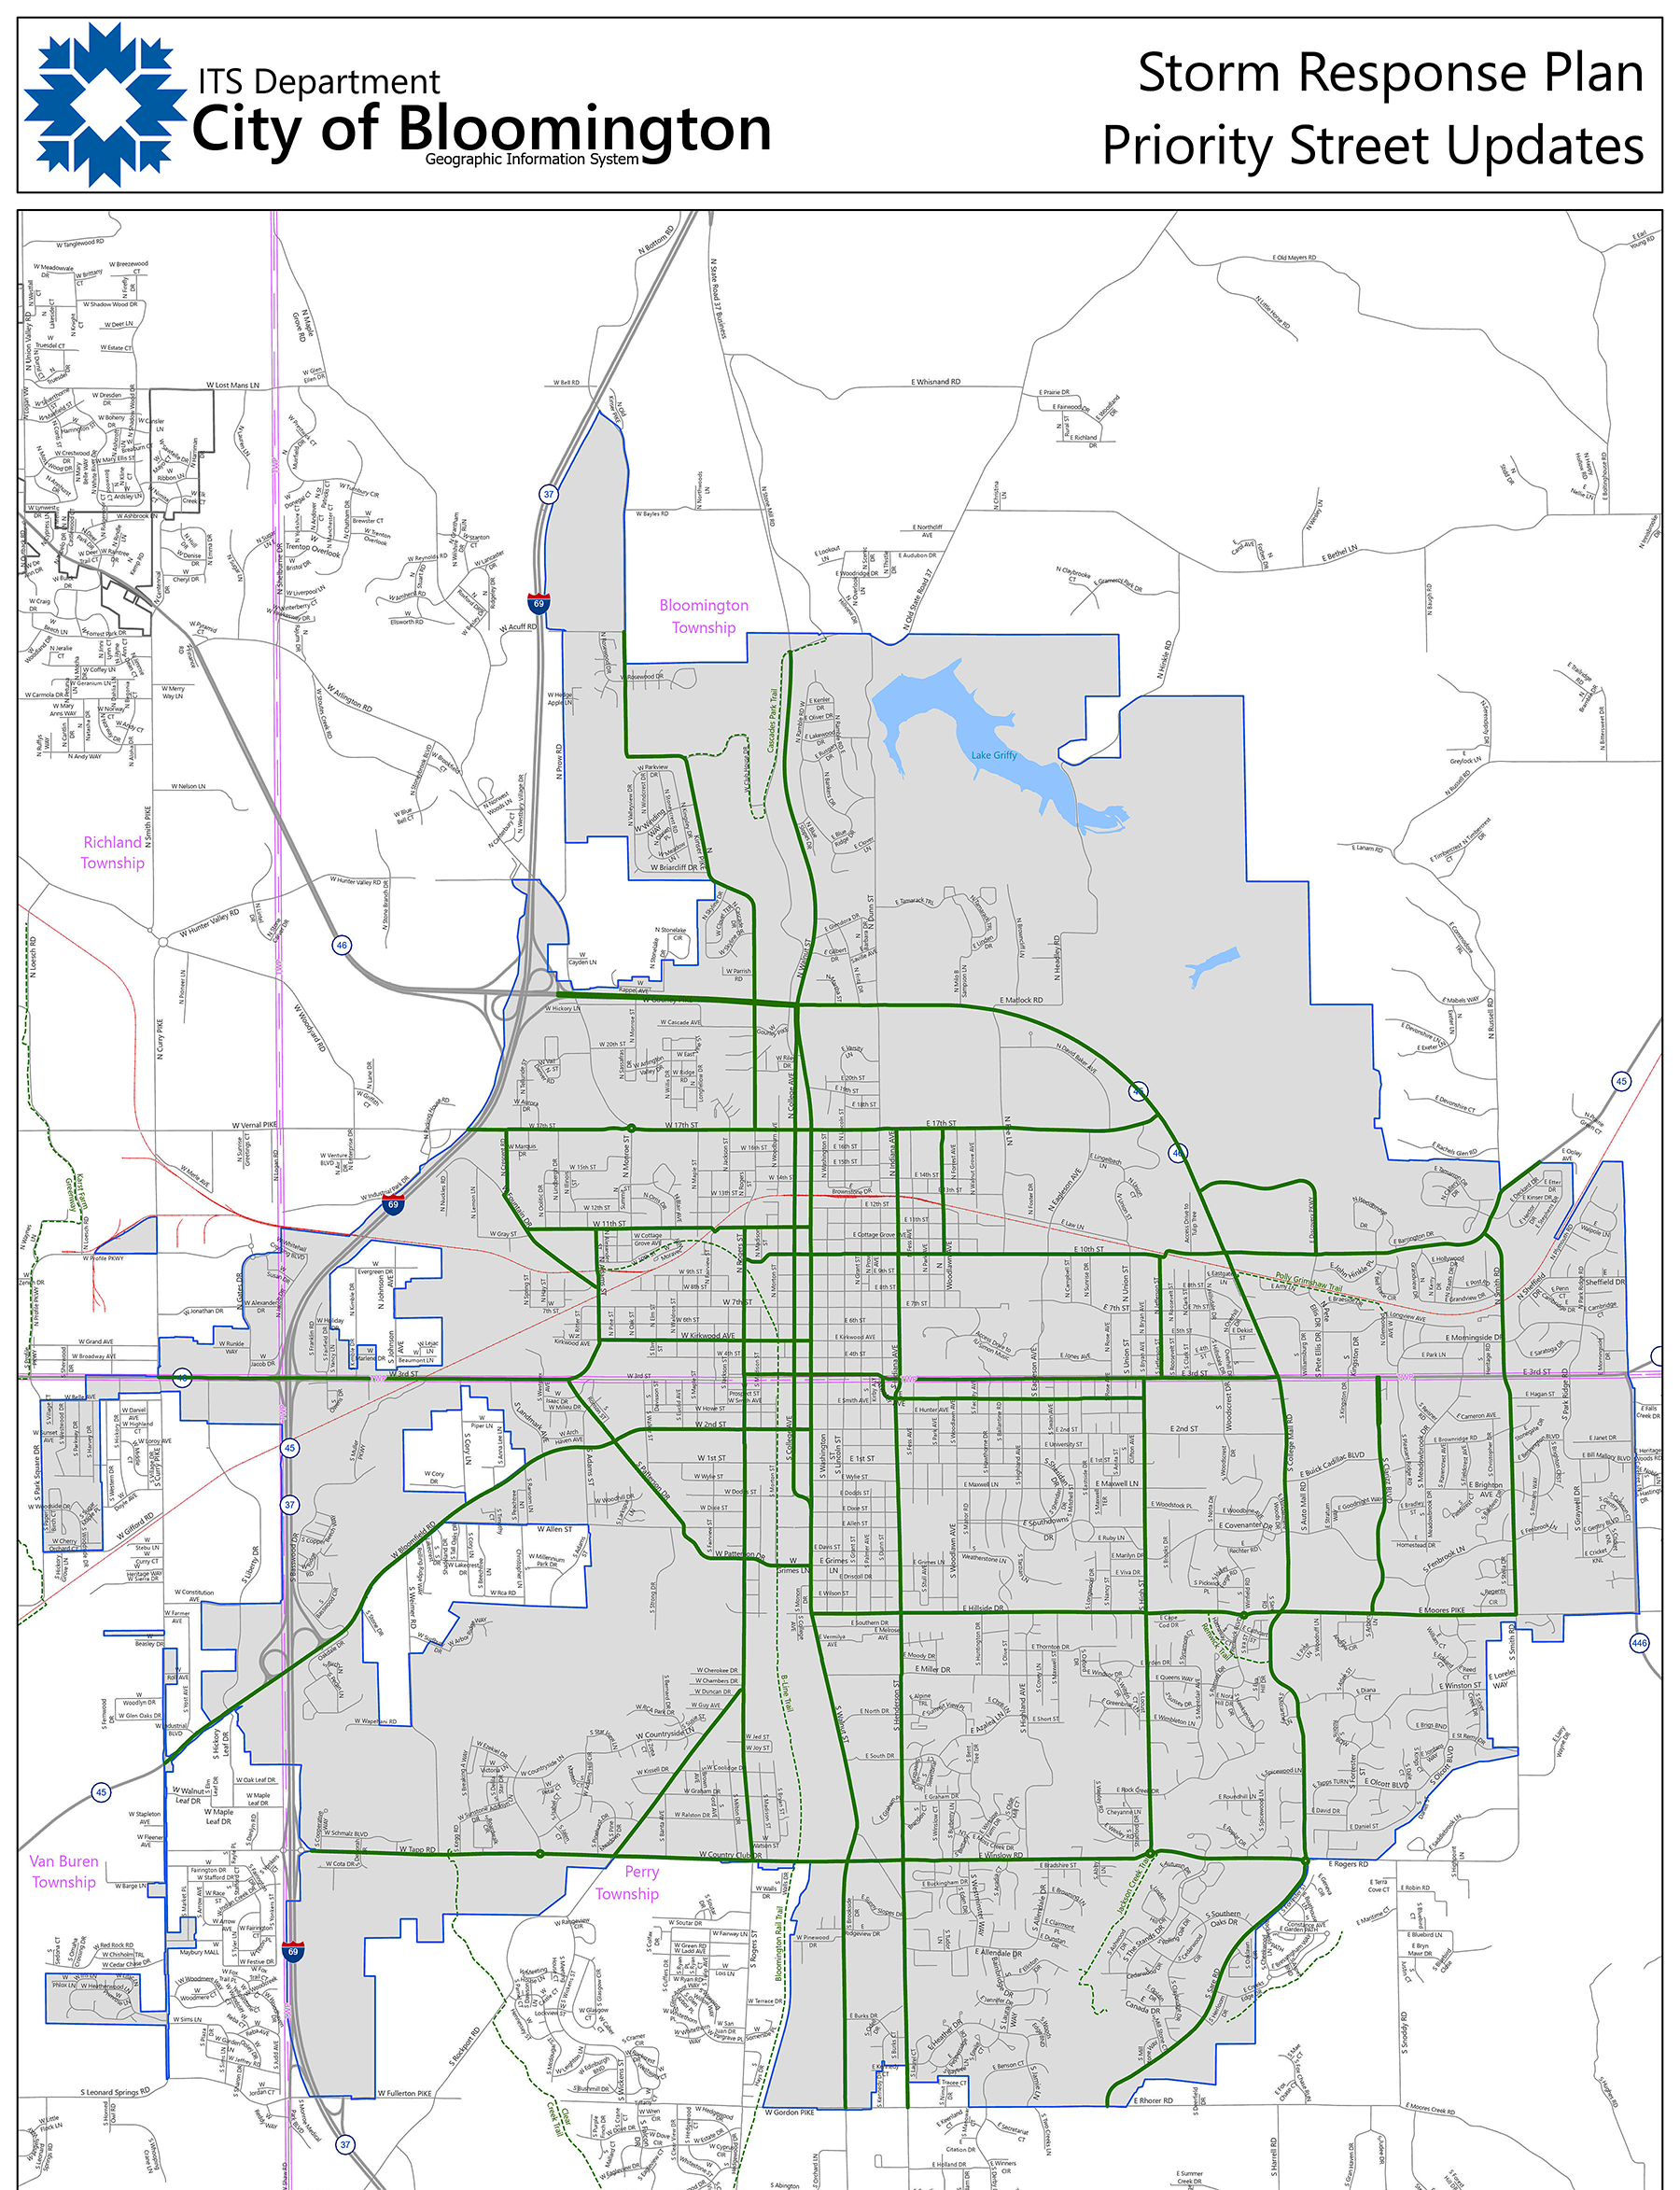 Map of priority streets in Bloomington, as identified by Parks and Recreation's storm response plan